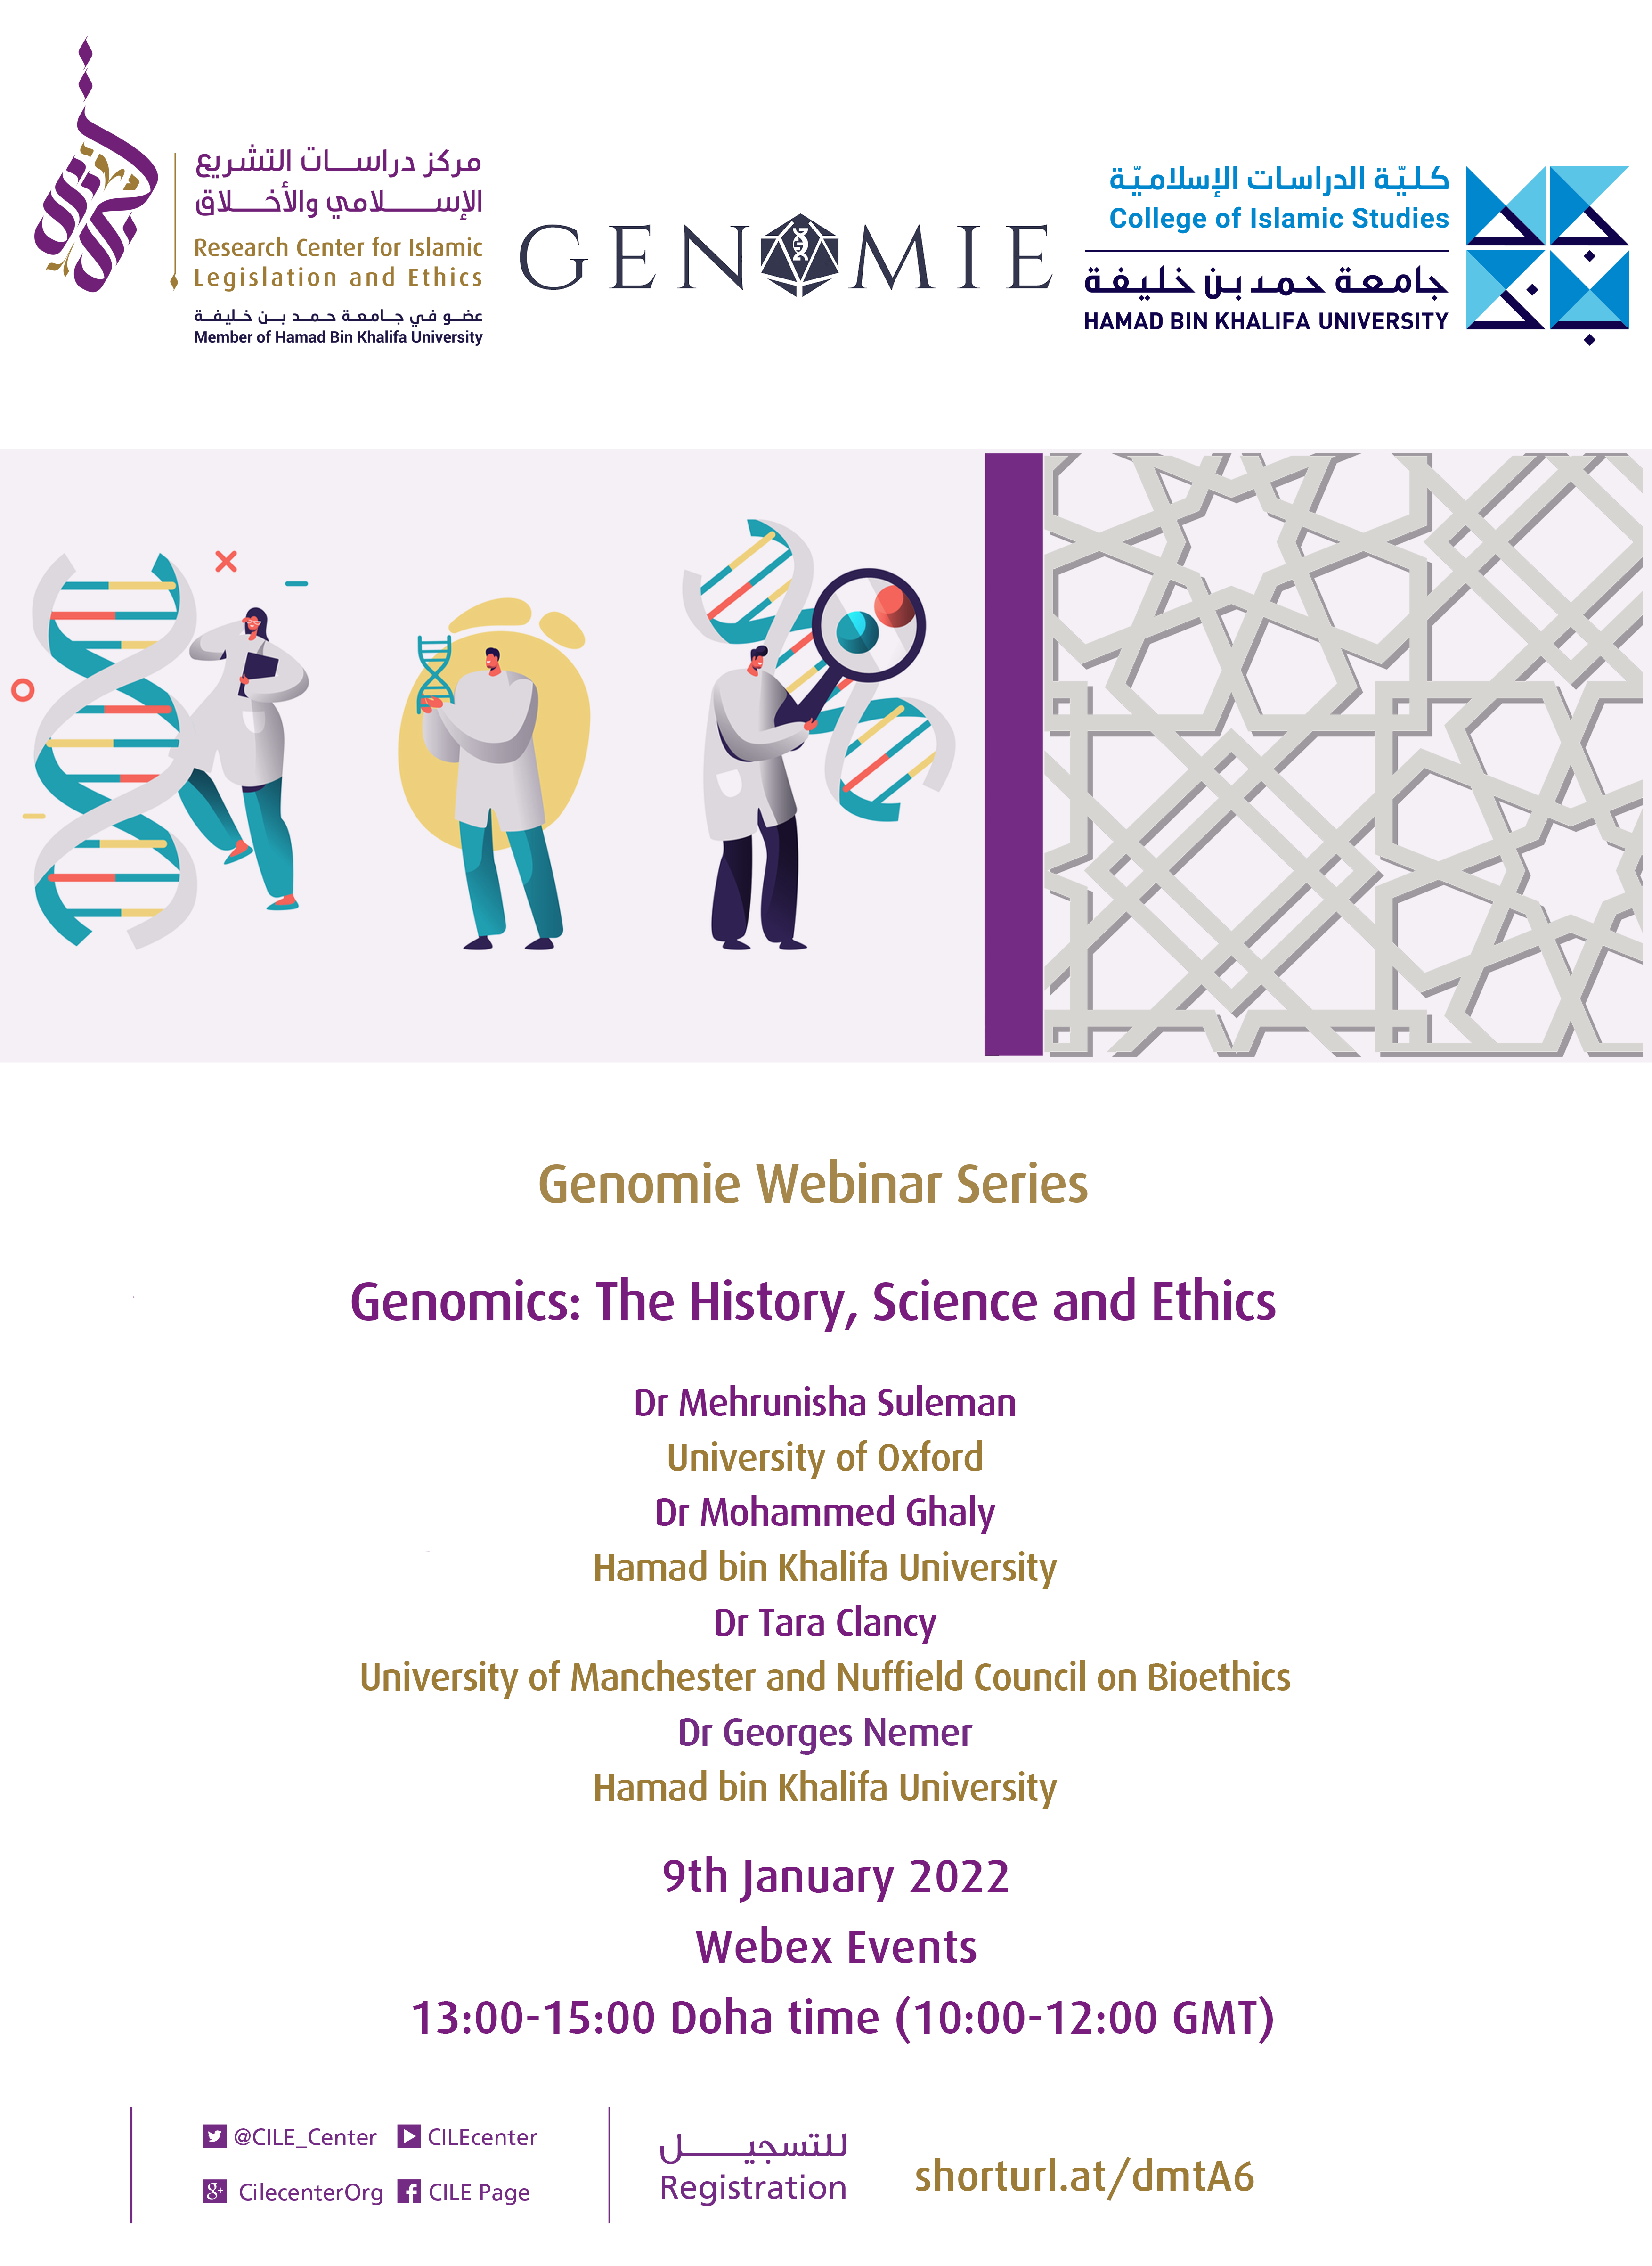 Genomics: the history, science and ethics